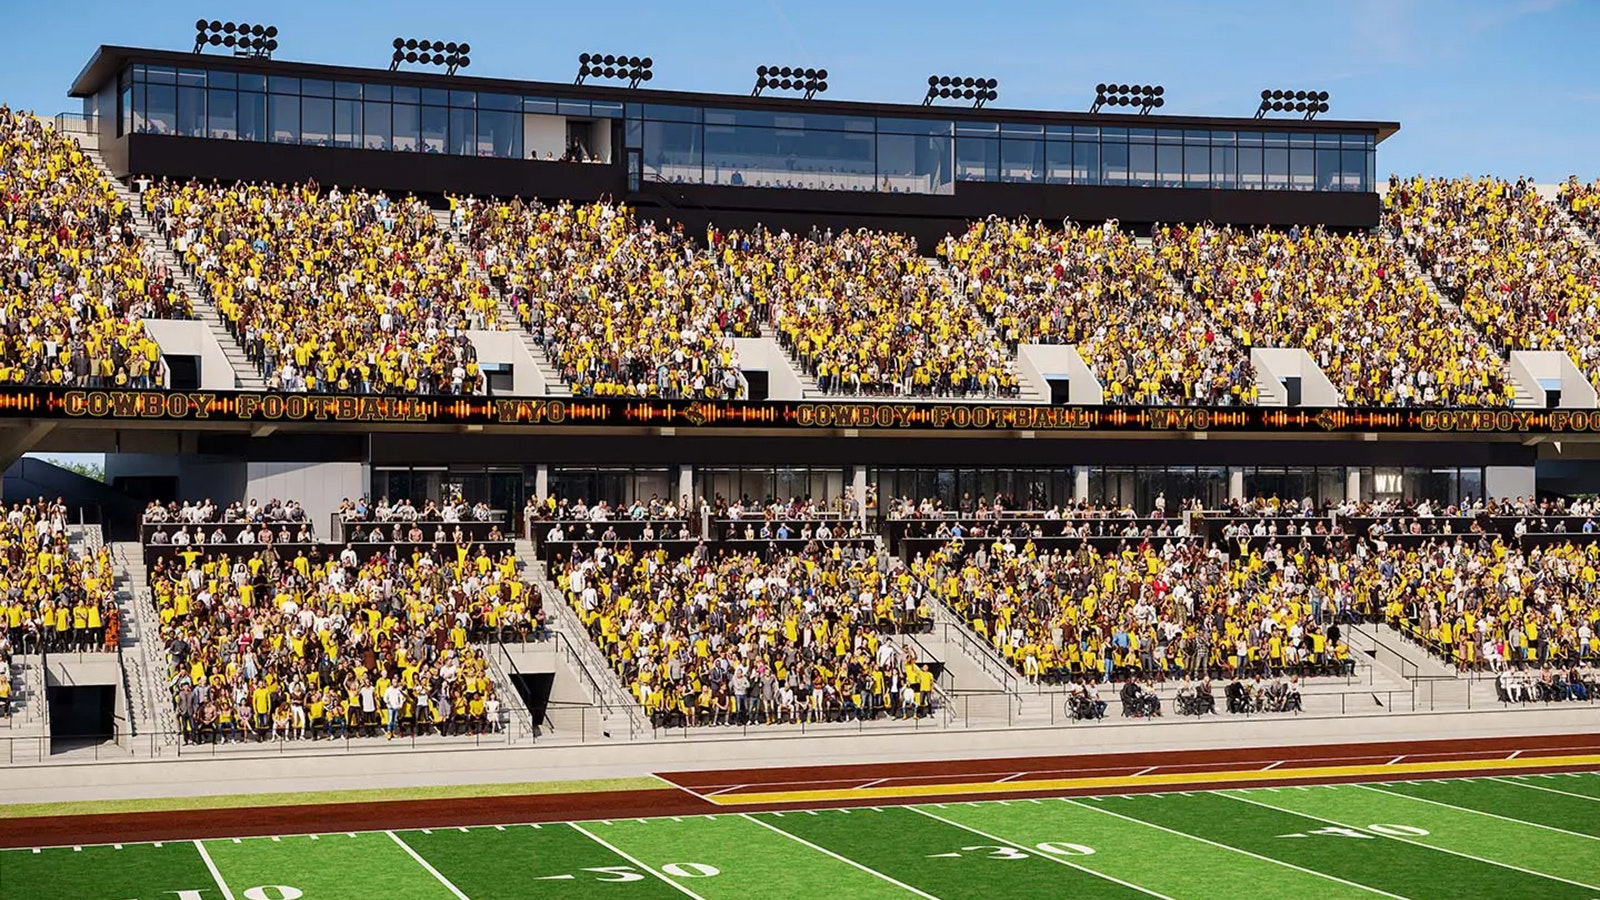 There will be new LED lighting around the inside edge of the stadium, seen in this illustration.